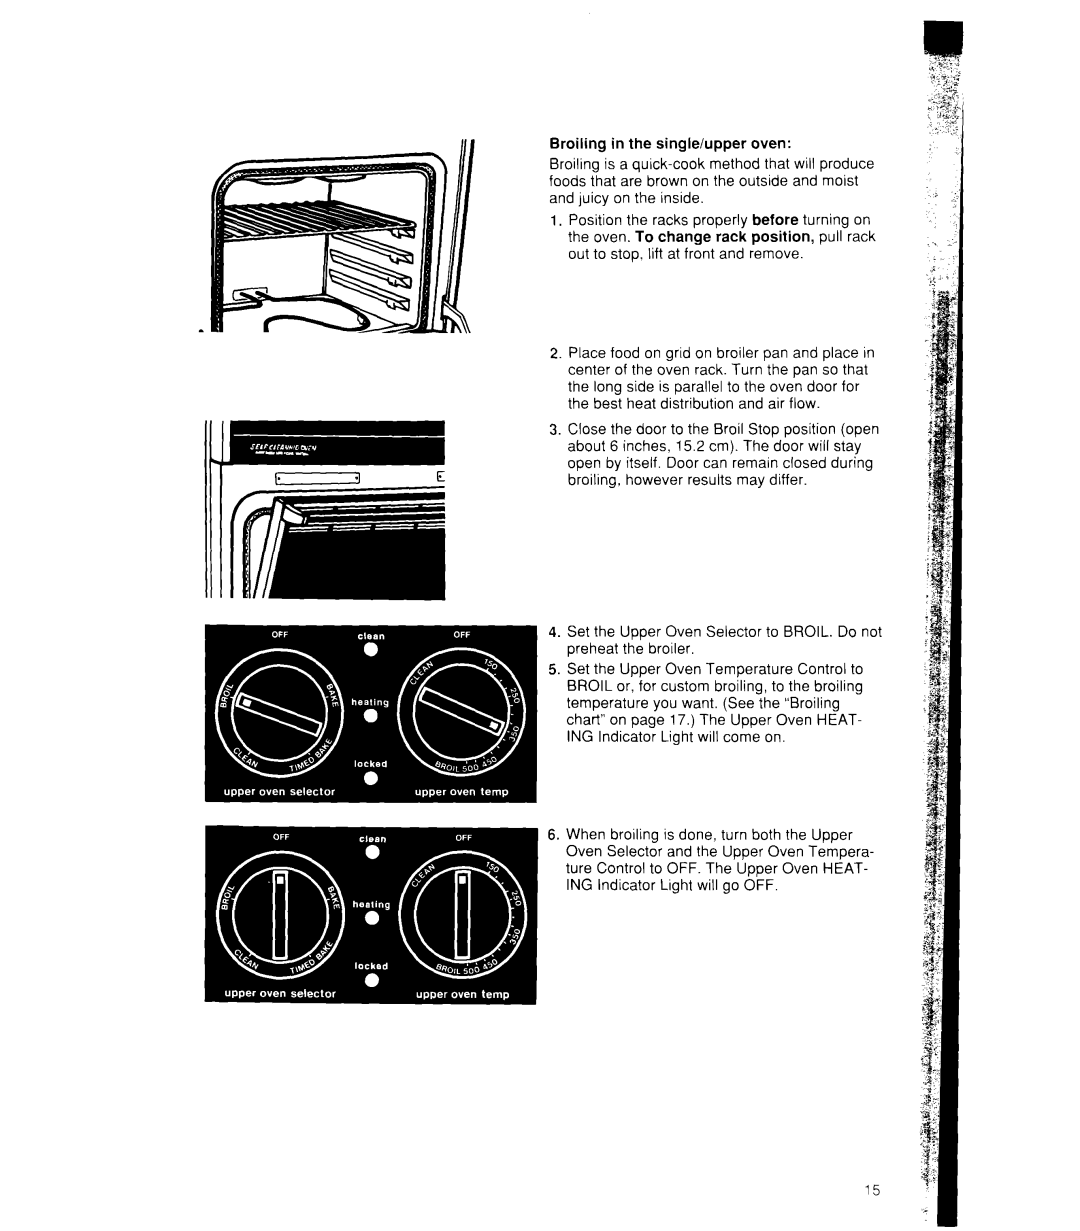 Whirlpool RB160PXX, RB770PXX, RB760PXX, RB170PXX manual Broiling in the single/upper oven 